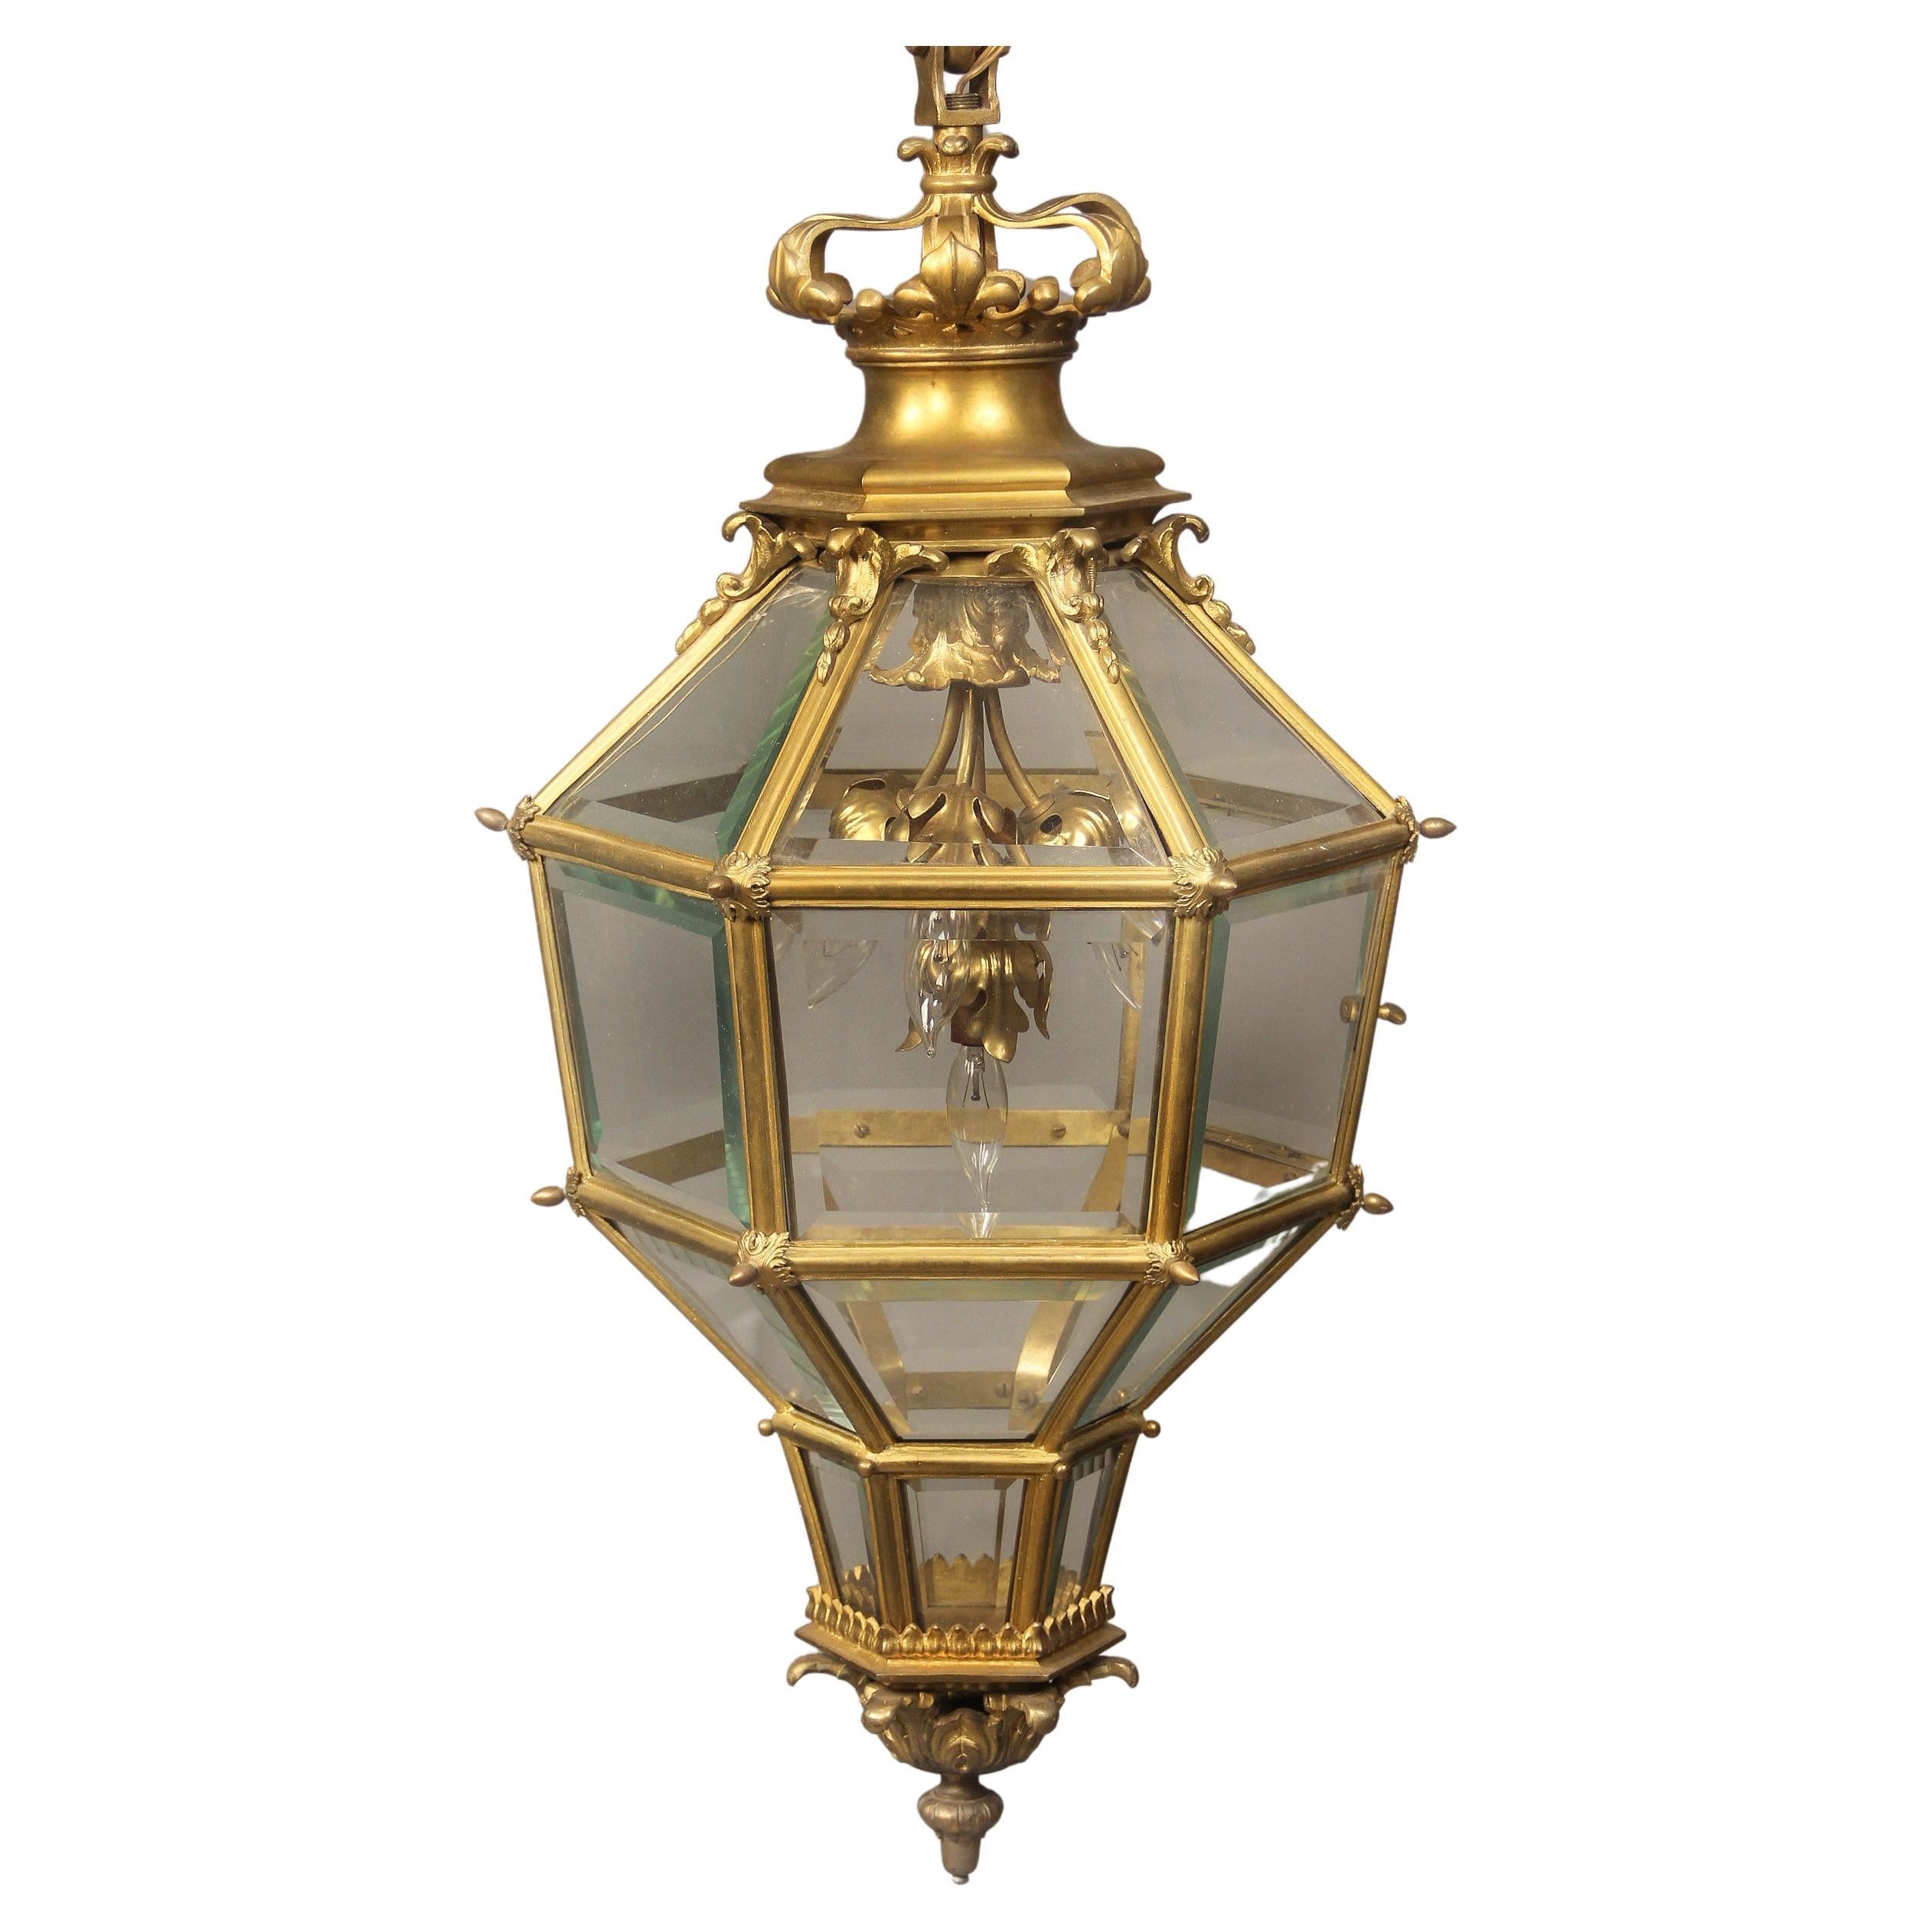 Late 19th/Early 20th Century Gilt Bronze and Glass ‘Versailles’ Hall Lantern For Sale